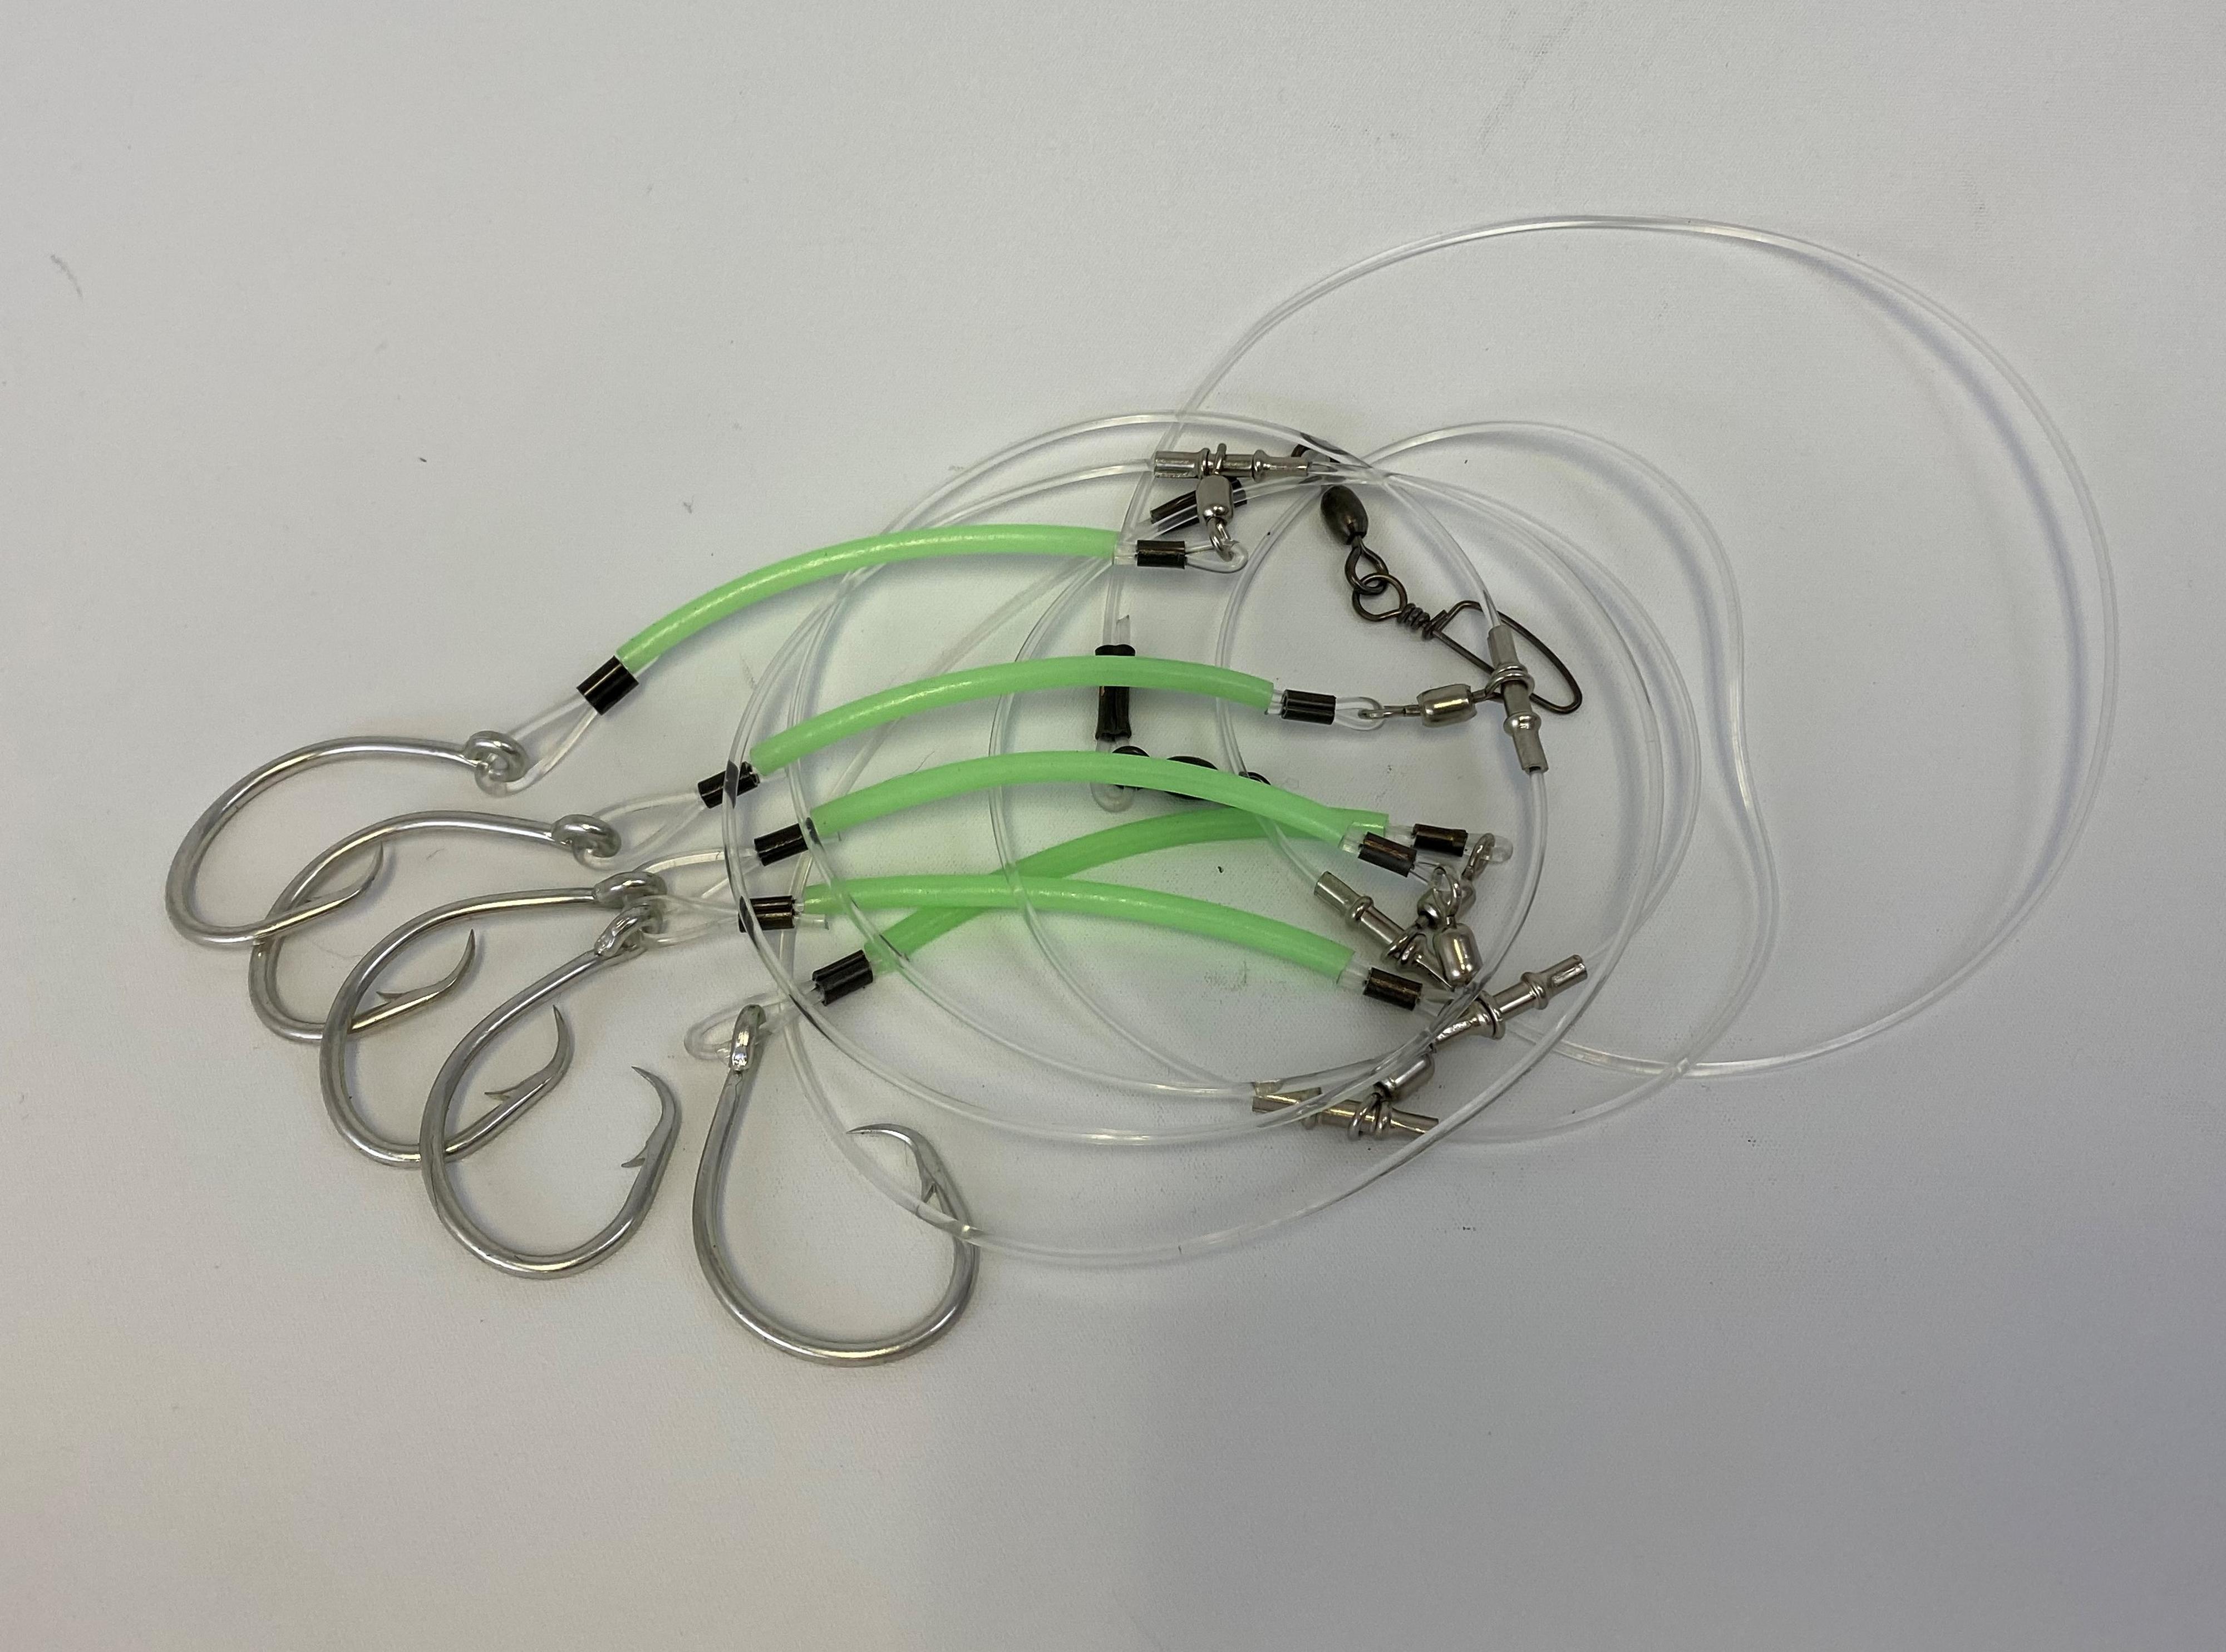 Terminal Tackle - Ready Rigs: Fishermans Ideal Supply House - : :Fishermans  Ideal Supply House